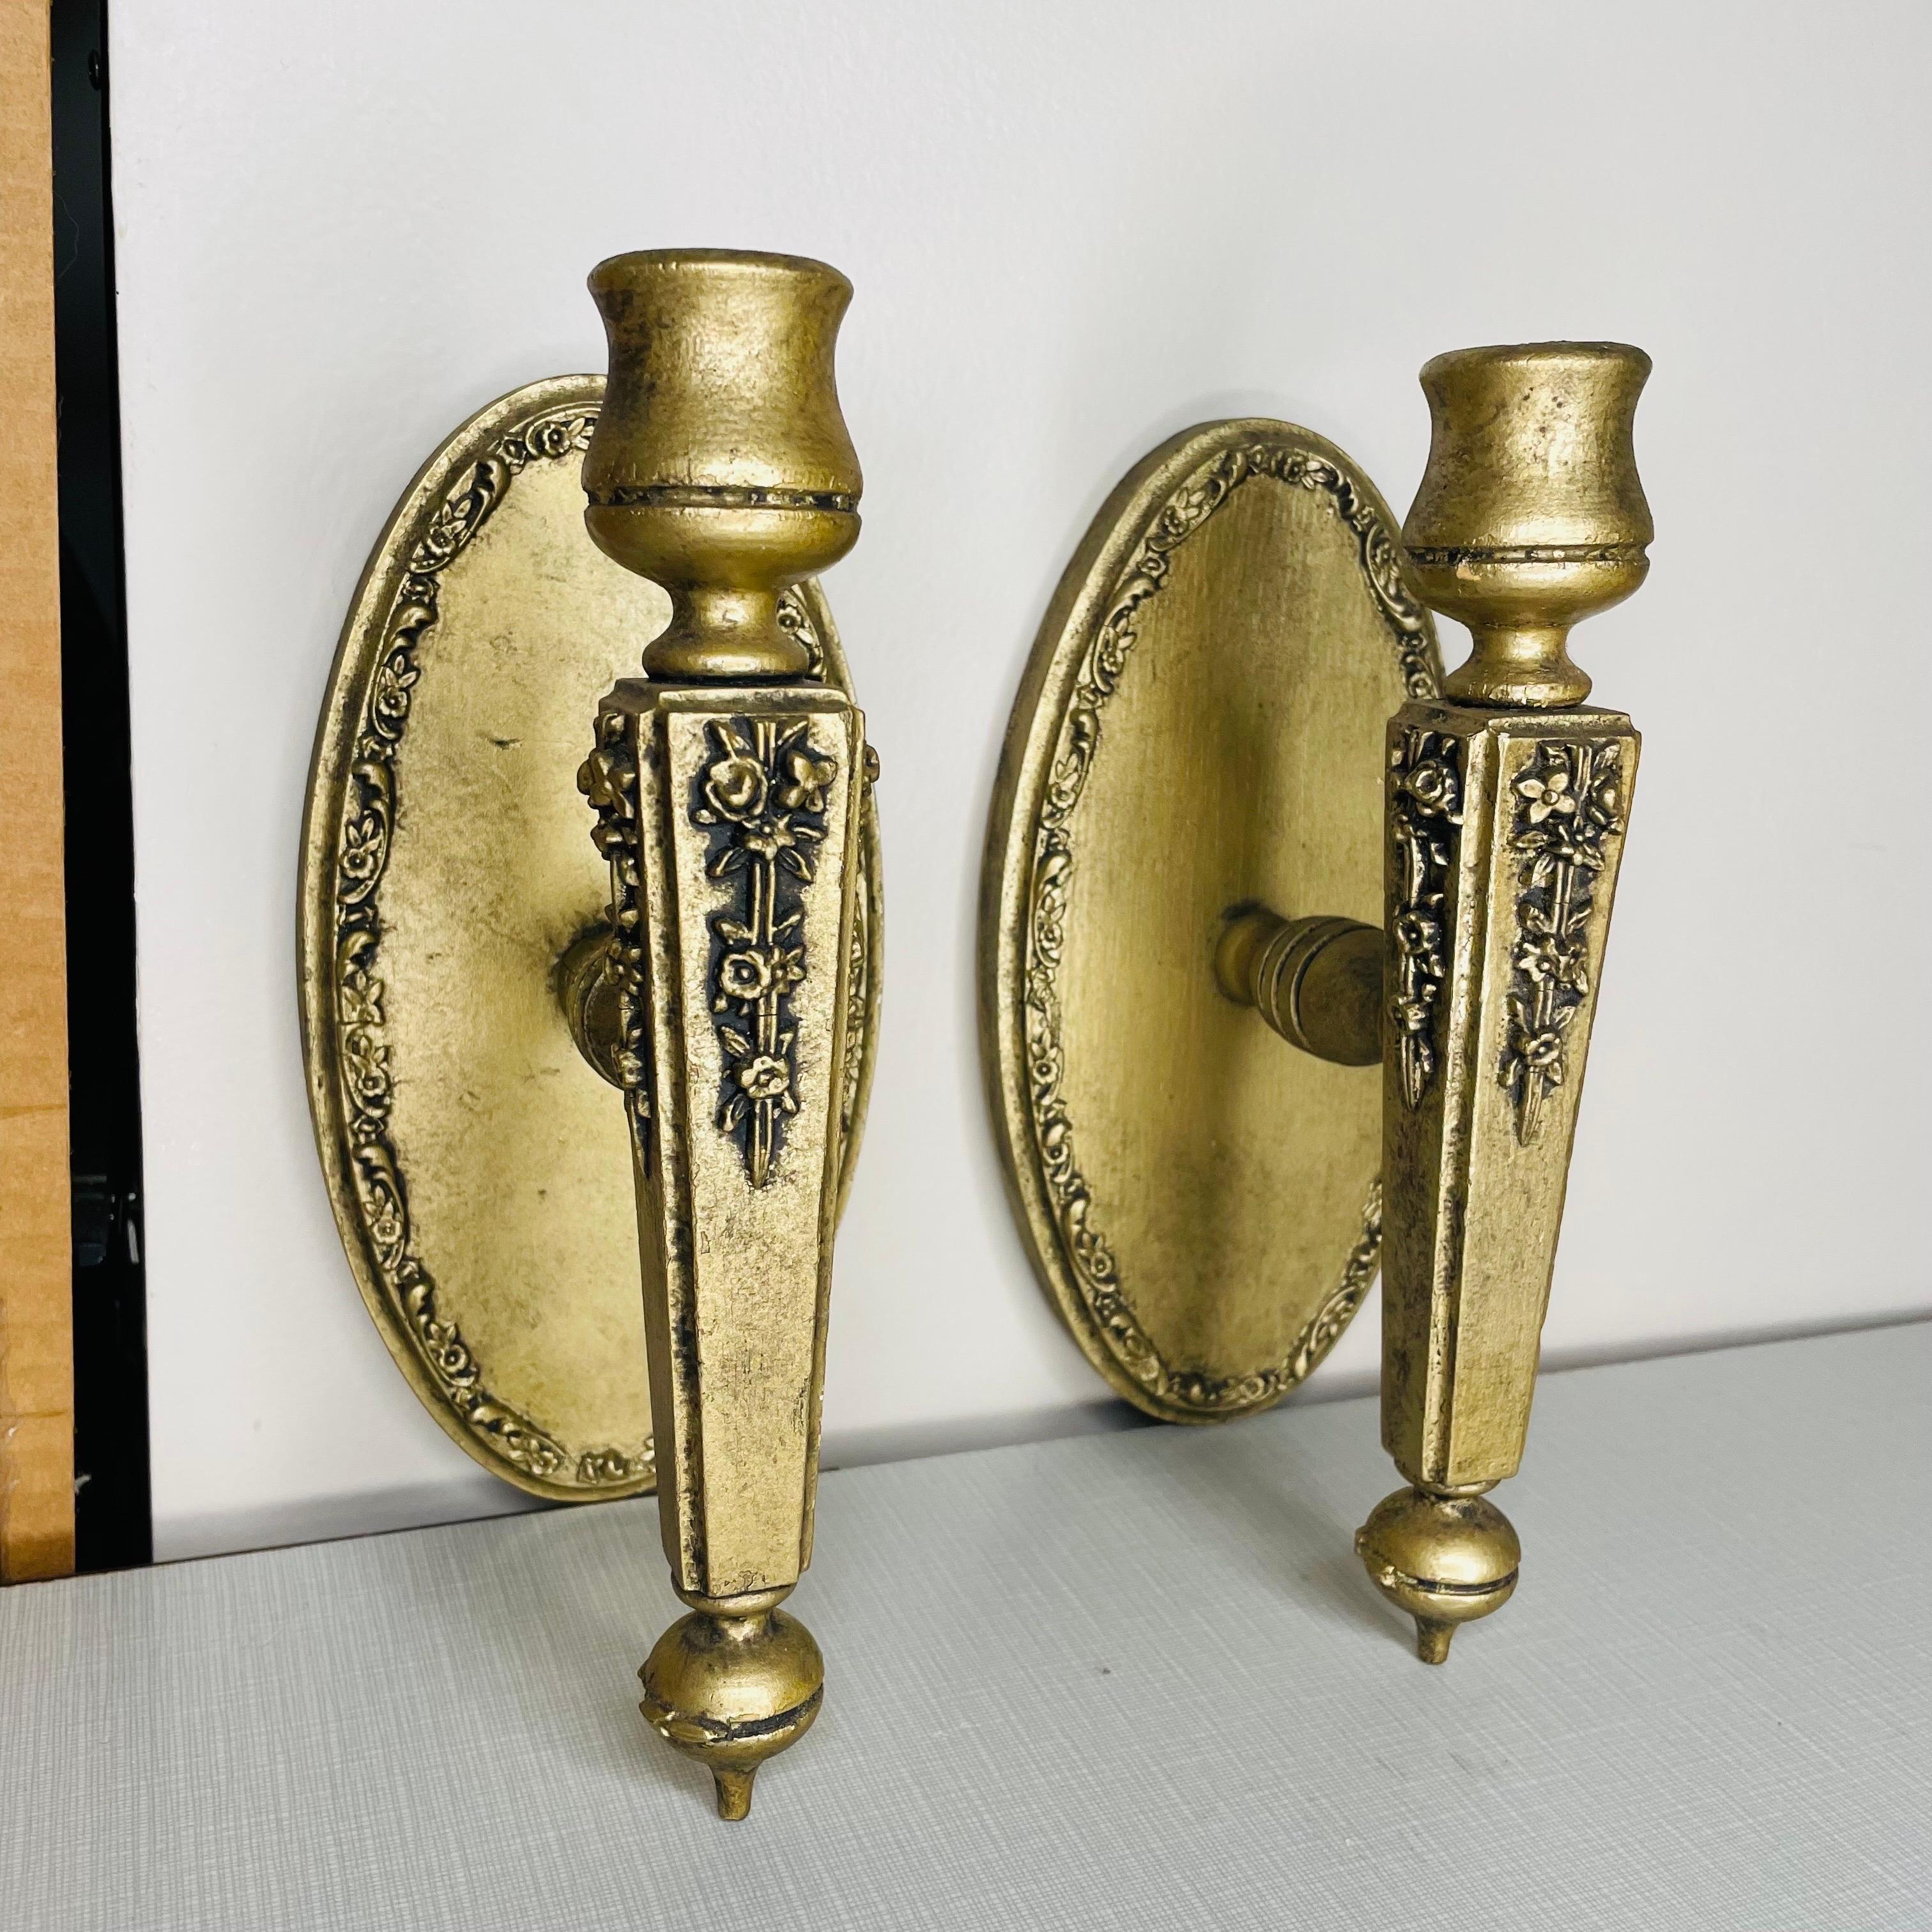 Pair of giltwood wall sconces that appear to have been hand carved. All pieces are wooden aside from one nail in the back of each to secure the sconce to the backing and the metal piece that is affixed to the backside for hanging on the wall. Both